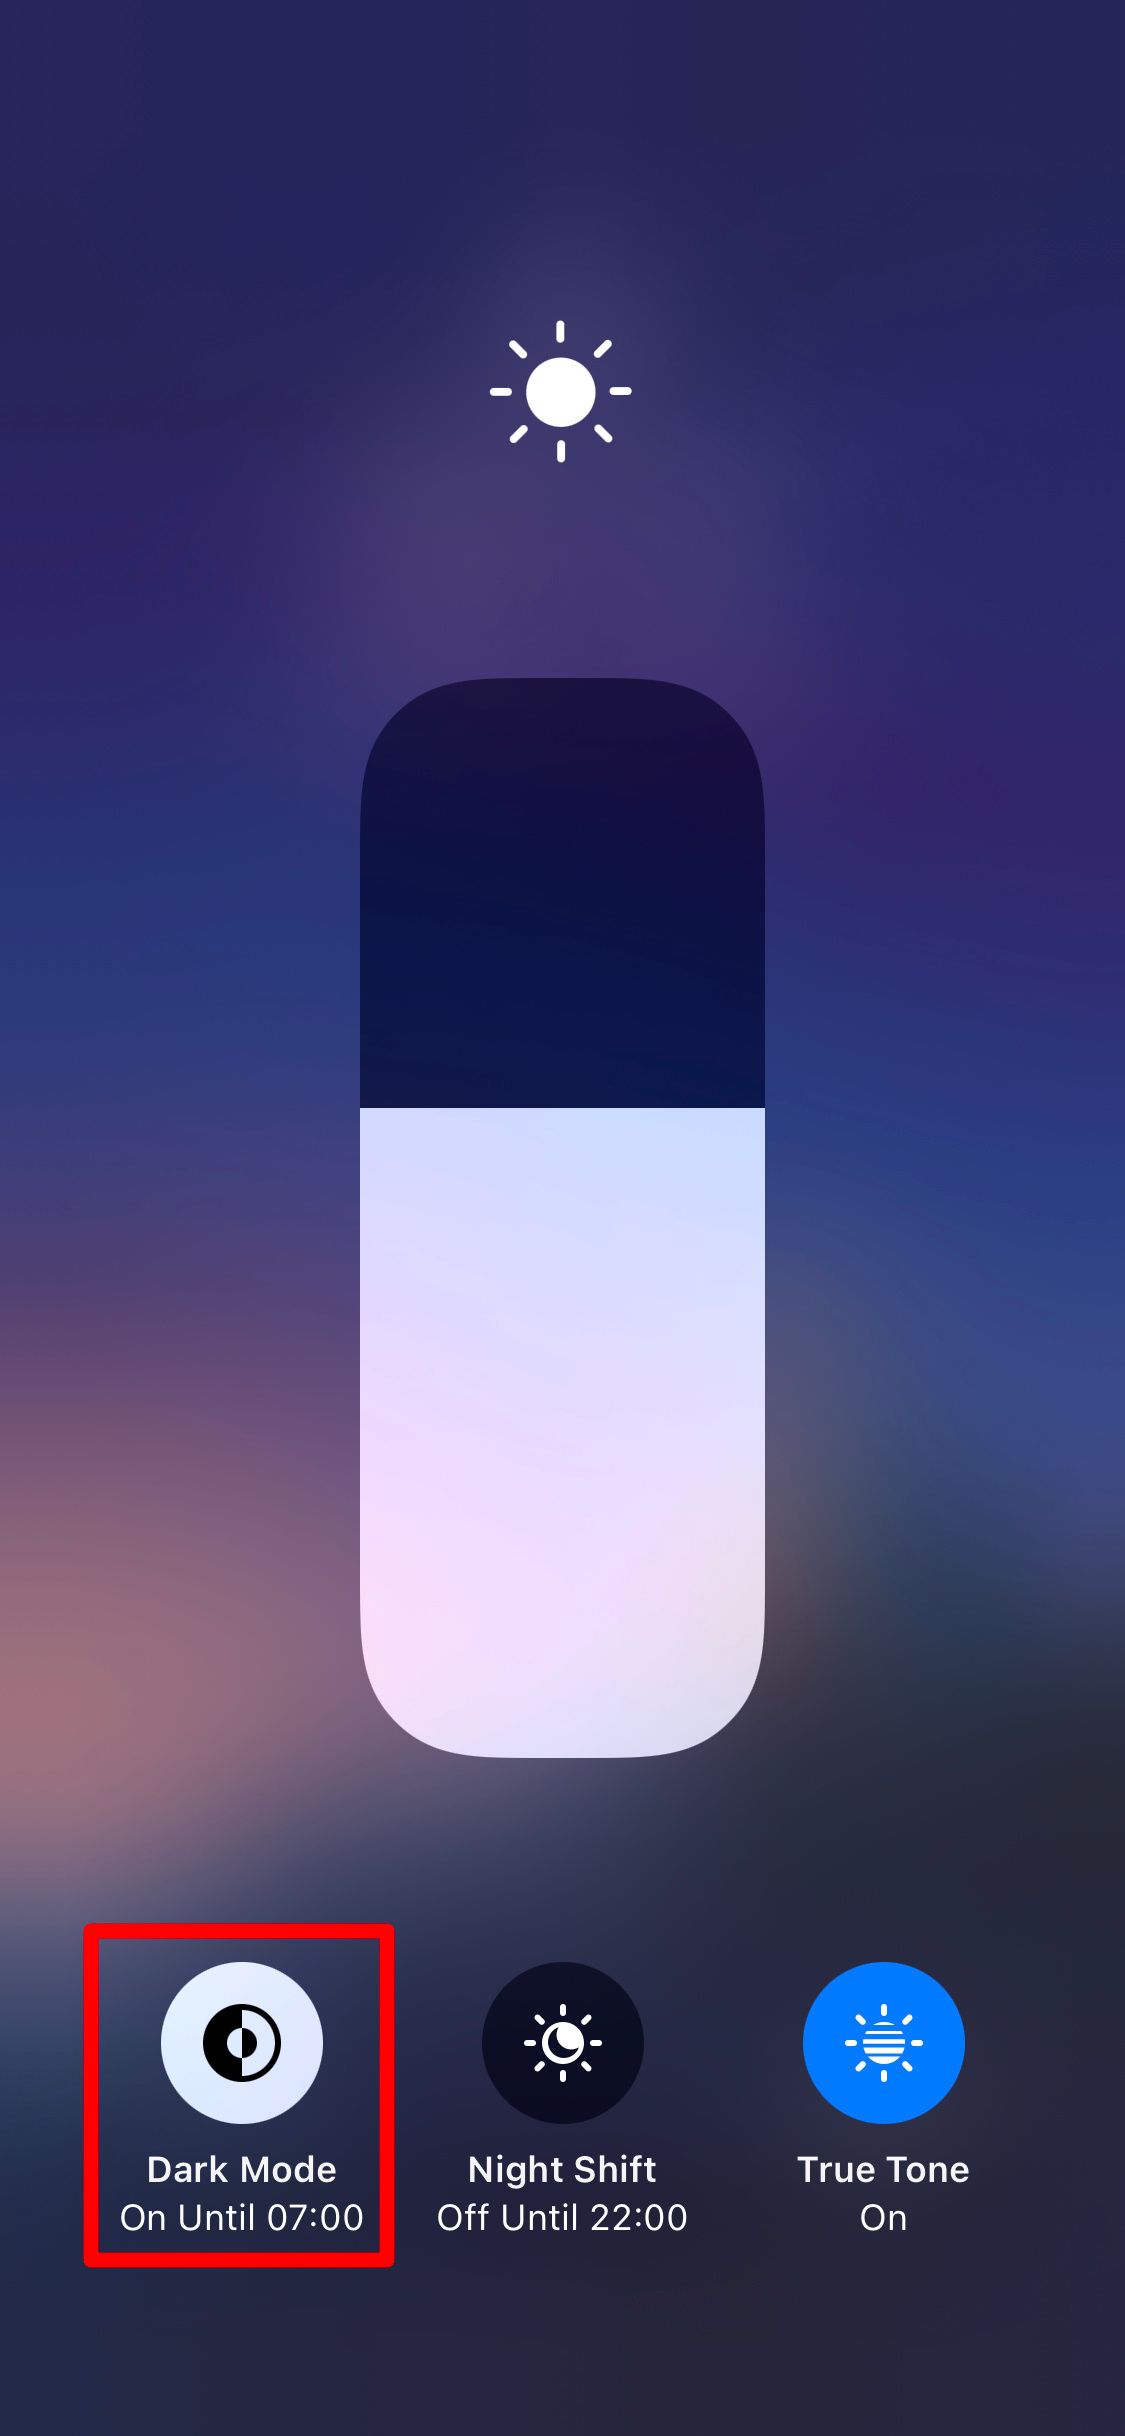 iPhone Control Center showing Dark Mode toggle